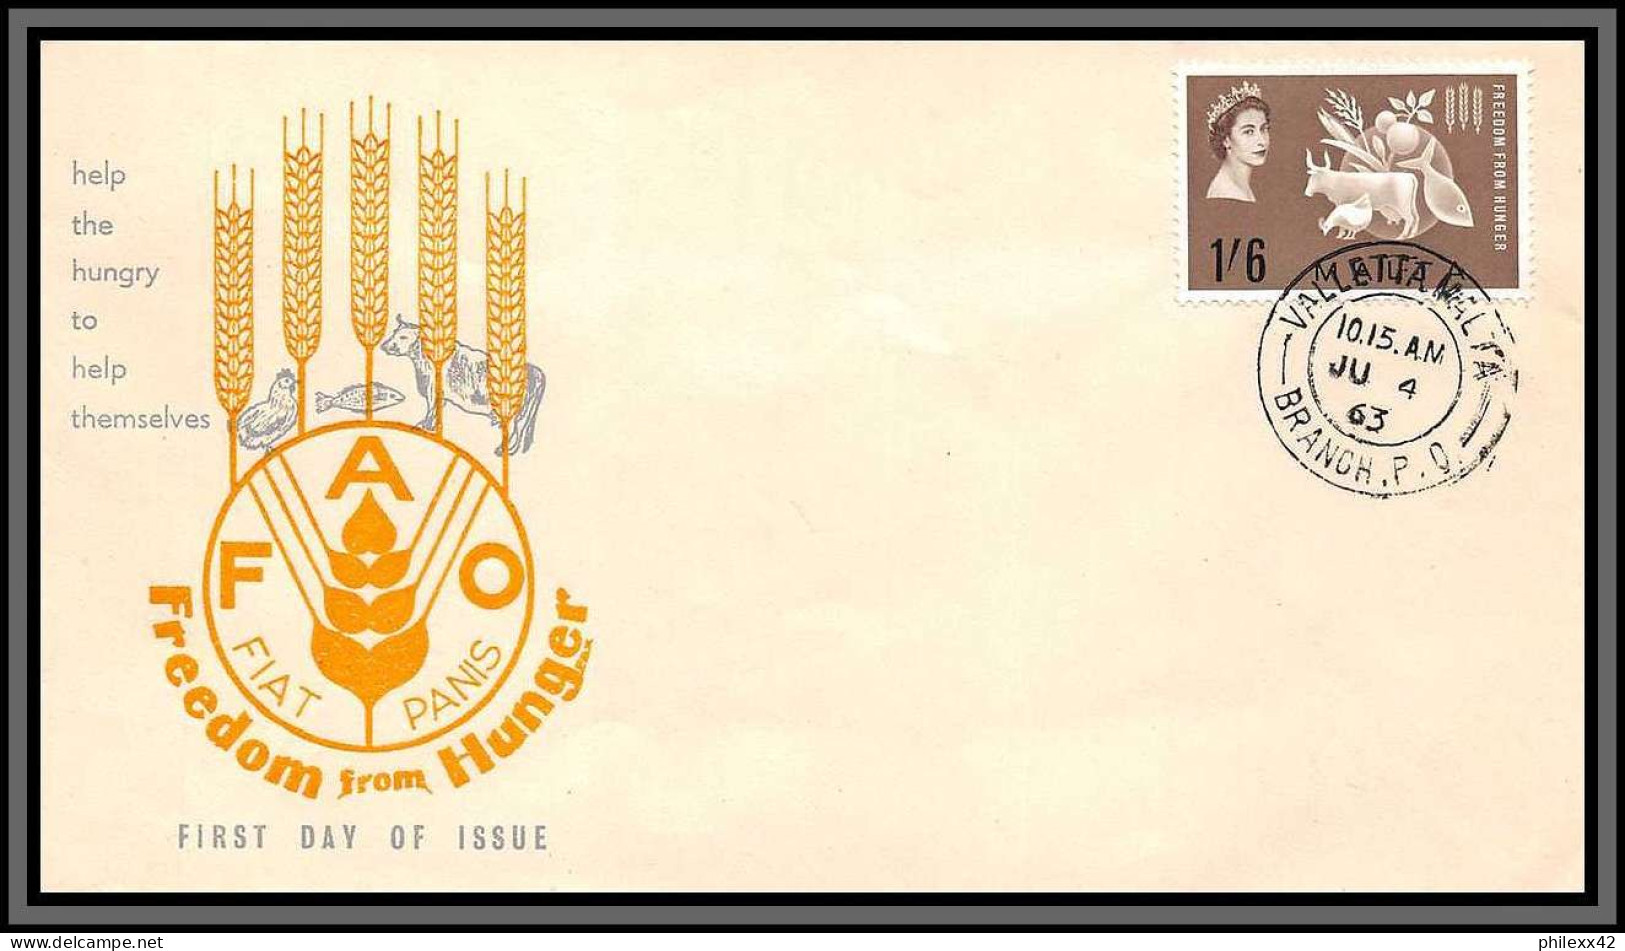 11097 Fdc Freedom From Hunger 1963 FAO Lettre Cover Great Britain England  - 1952-1971 Pre-Decimal Issues